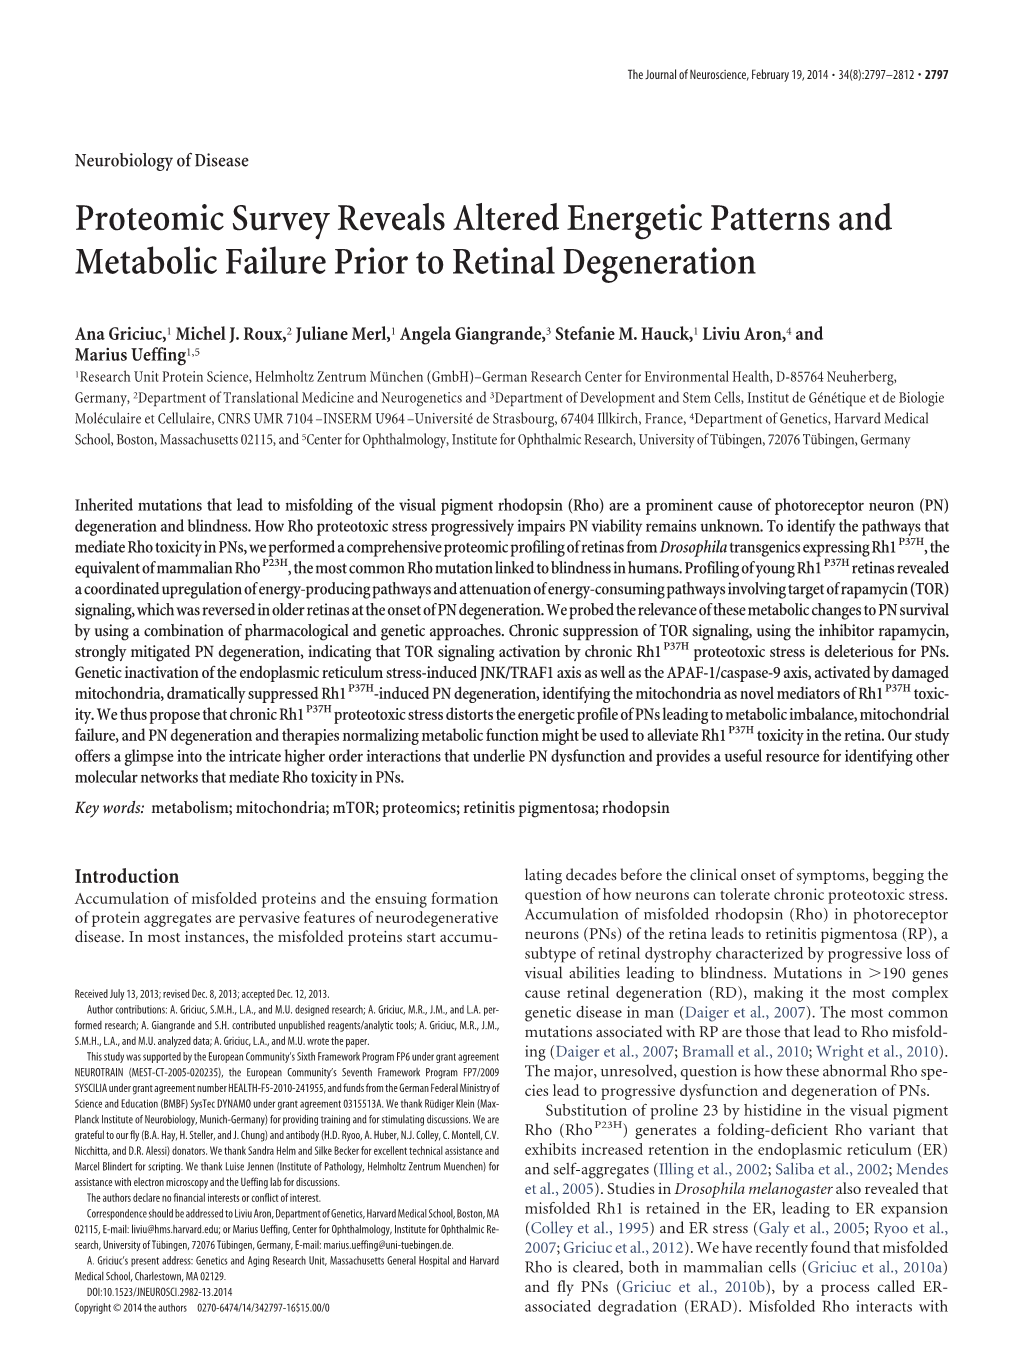 Proteomic Survey Reveals Altered Energetic Patterns and Metabolic Failure Prior to Retinal Degeneration